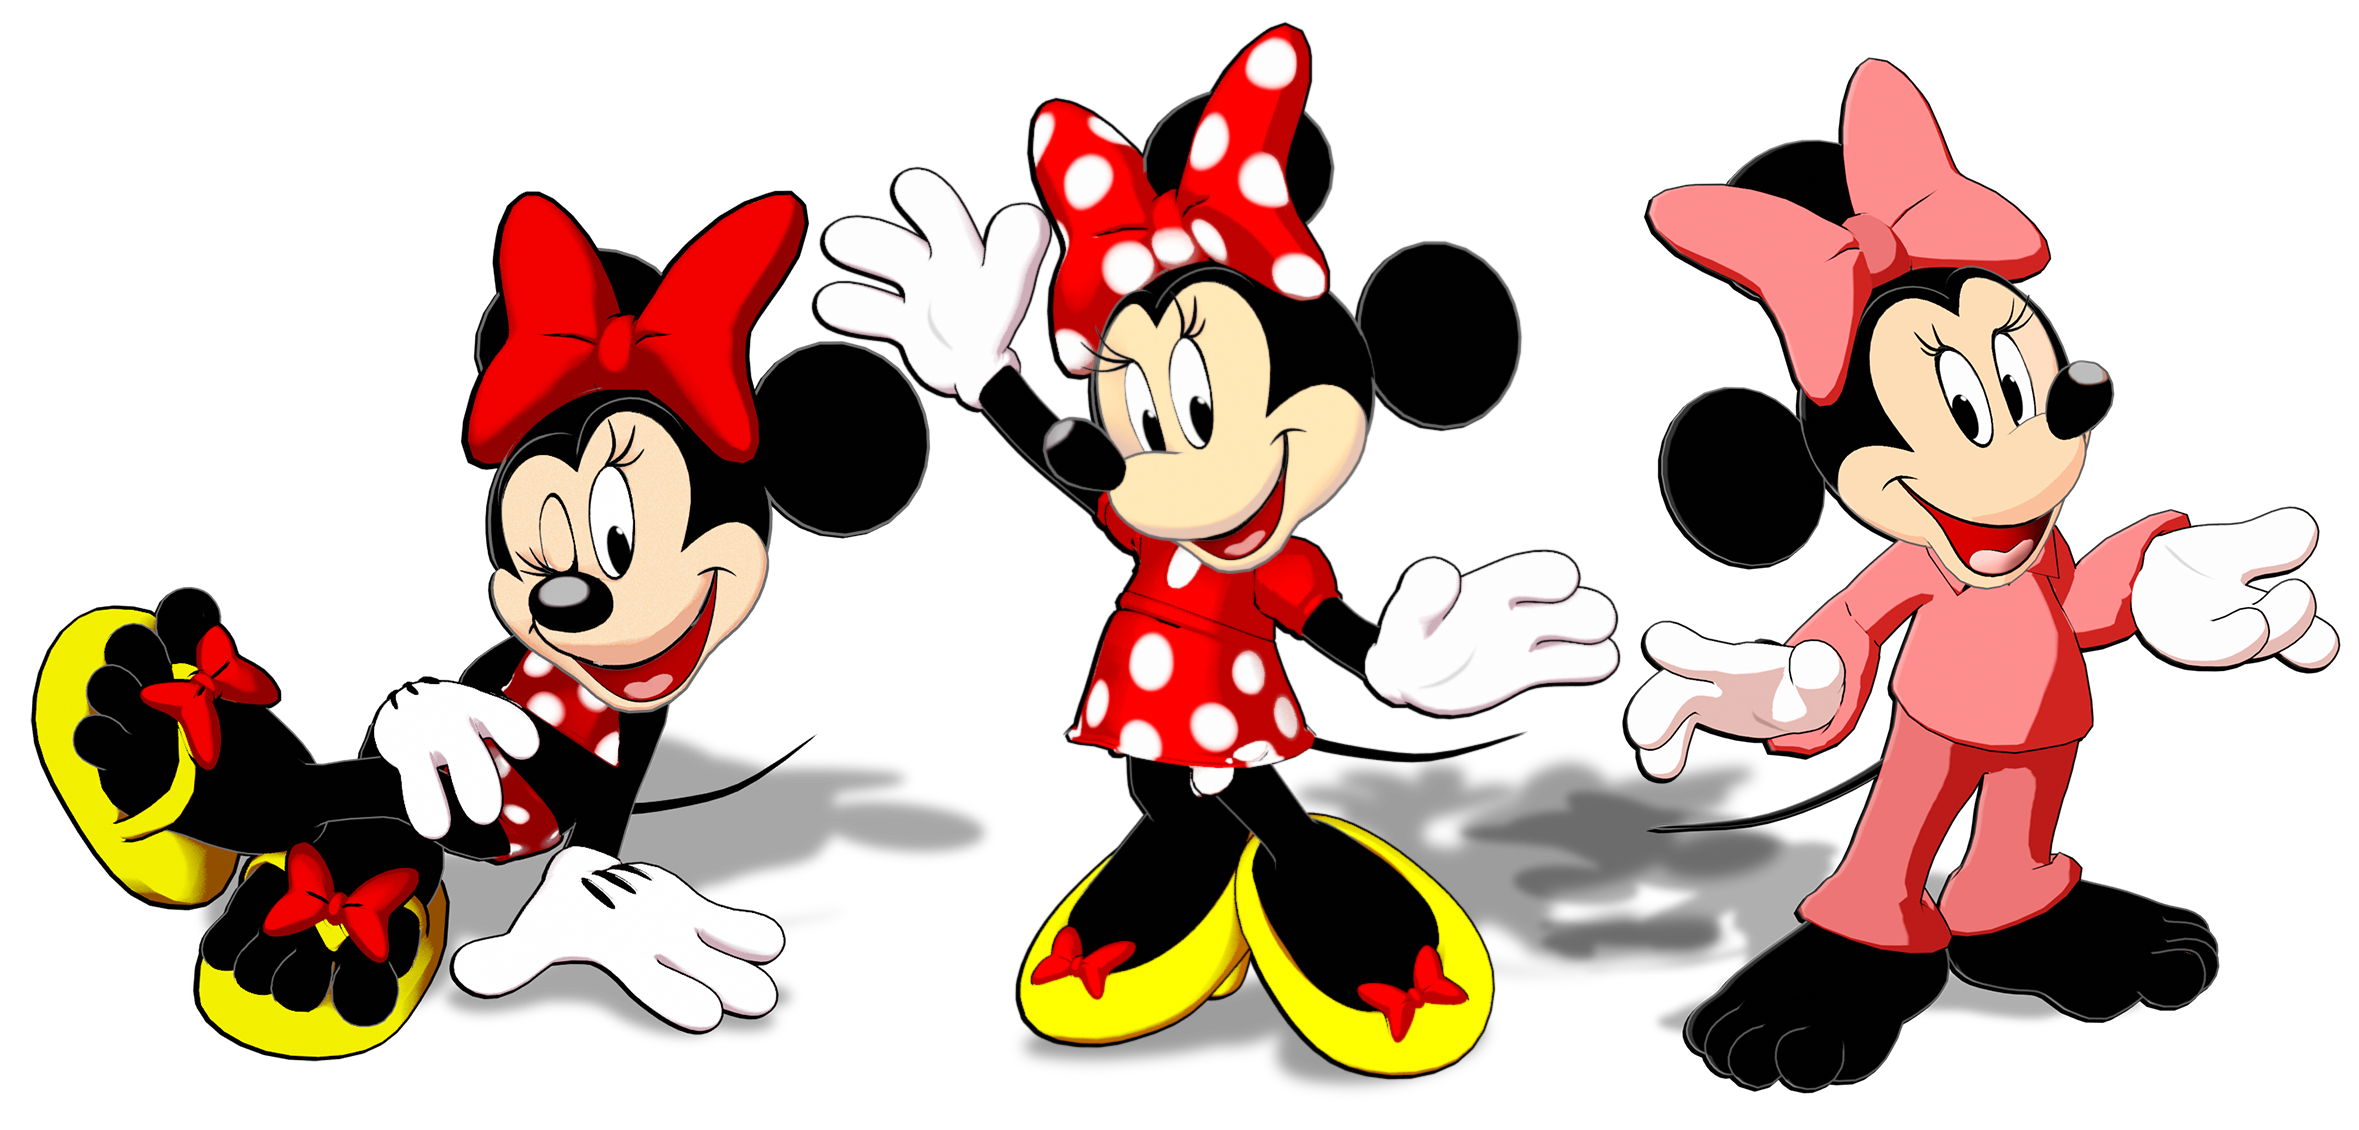  Model Download+ Minnie Mouse by JCThornton on DeviantArt